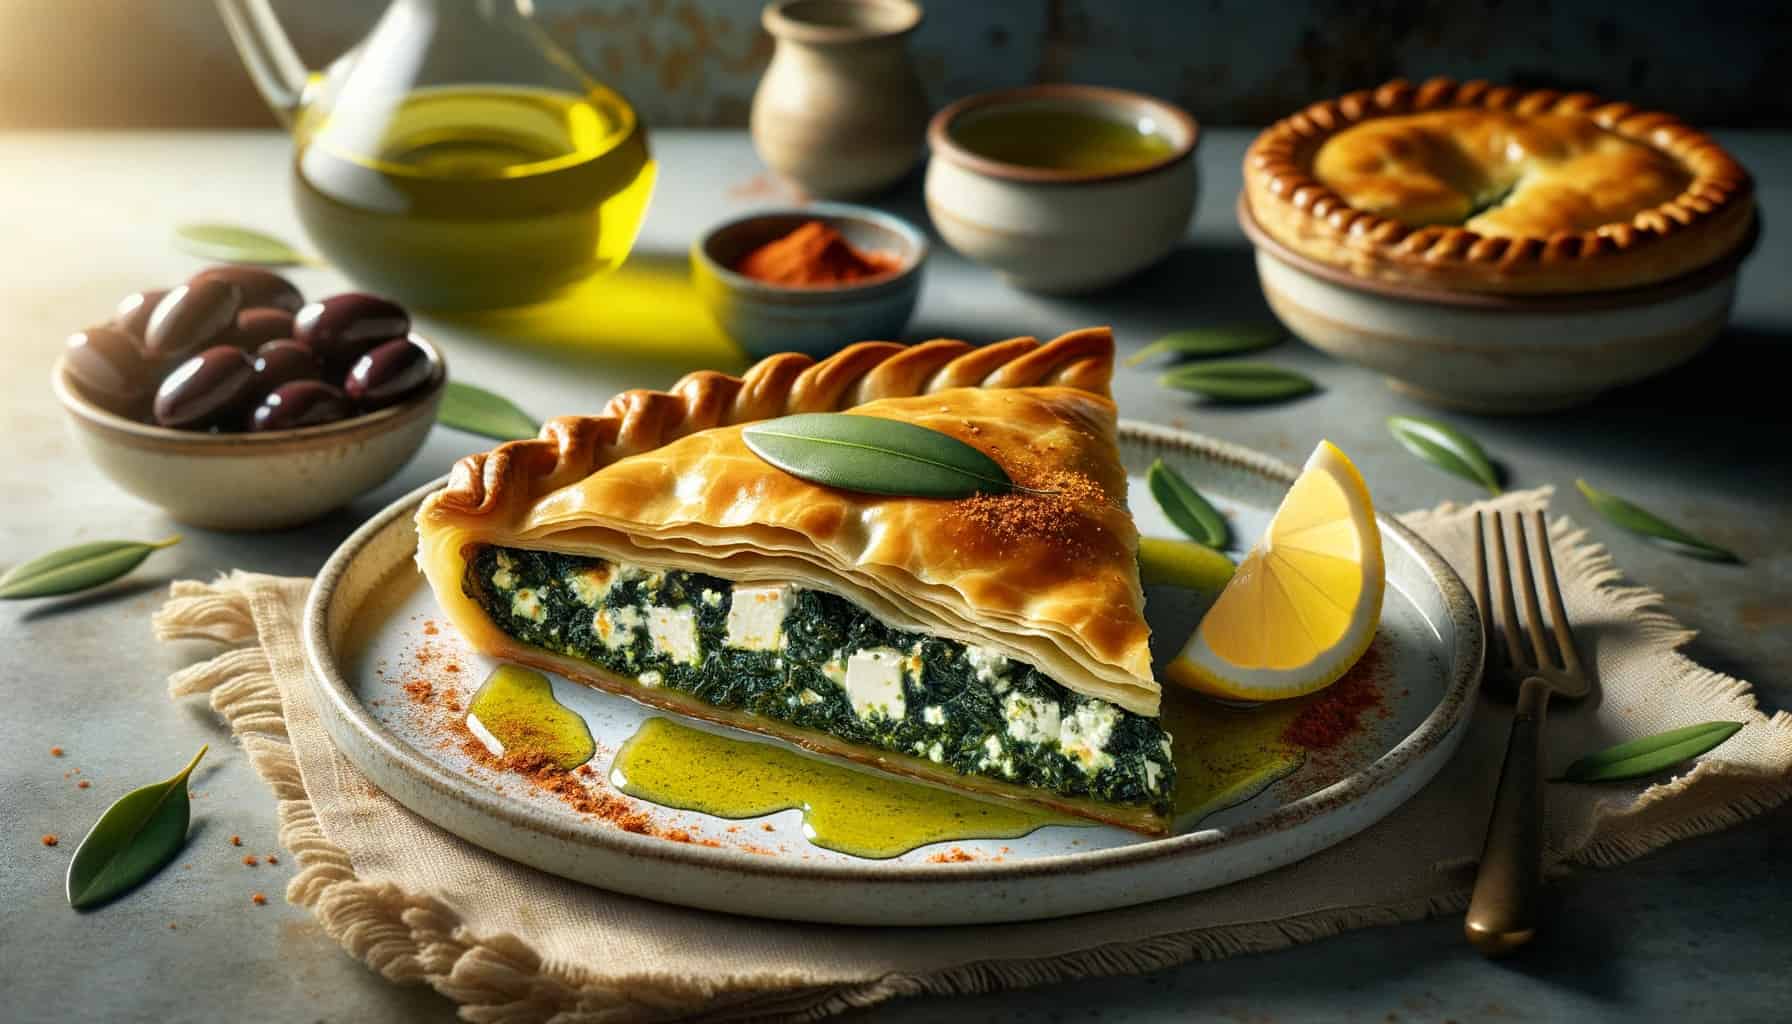 Mediterranean spinach and feta pie (spanakopita). With its many layers, the pastry is golden and crispy, contrasting beautifully with the rich and creamy spinach-feta filling. Beside the pie is a slice of lemon and a sprinkle of paprika. The background showcases a stone countertop with a pitcher of olive oil, a bowl of kalamata olives, and a carafe of white wine.